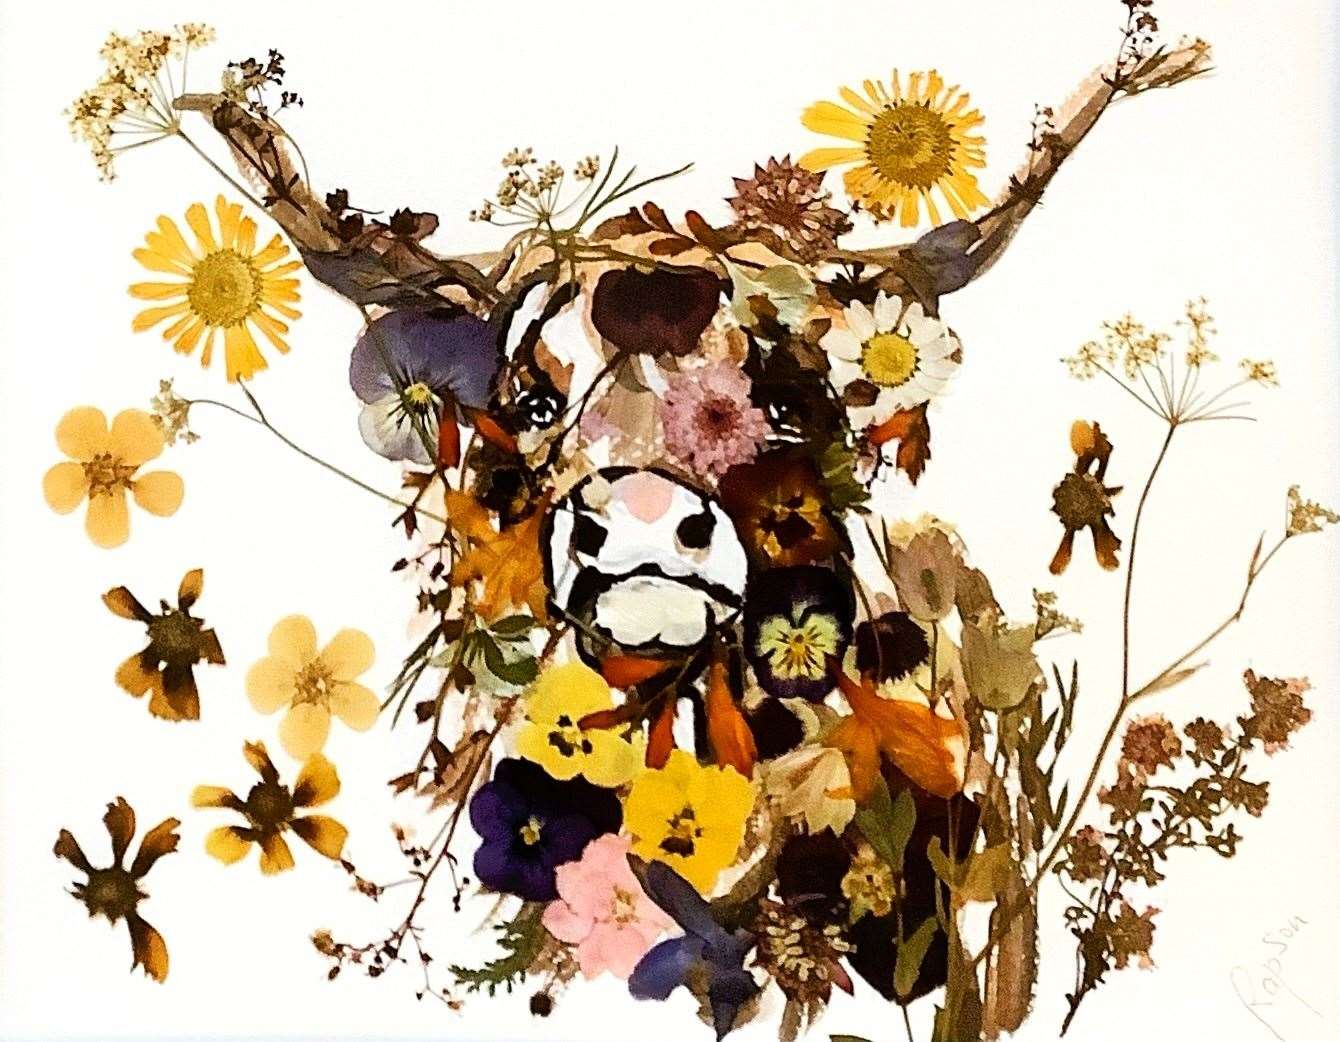 Elaine Rapson-Grant makes Oshibana pictures with pressed flowers. ‘Guinness, The Highland Cow' was made using Margaret Clyne's dried flower collection.